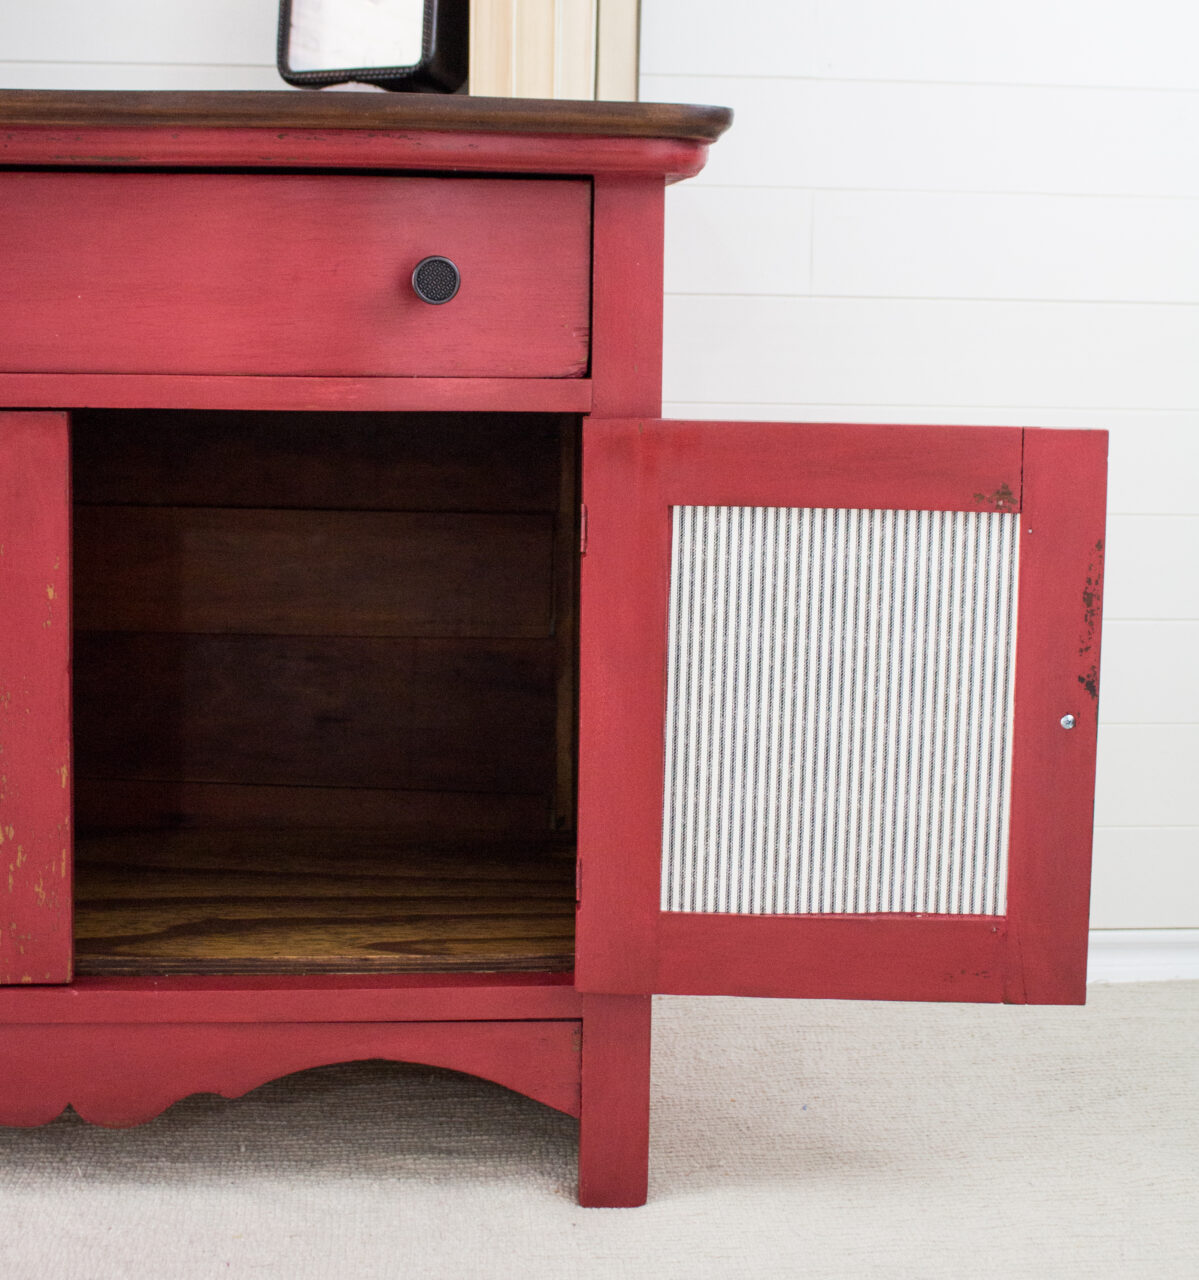 Holiday-Themed Hutch Makeover